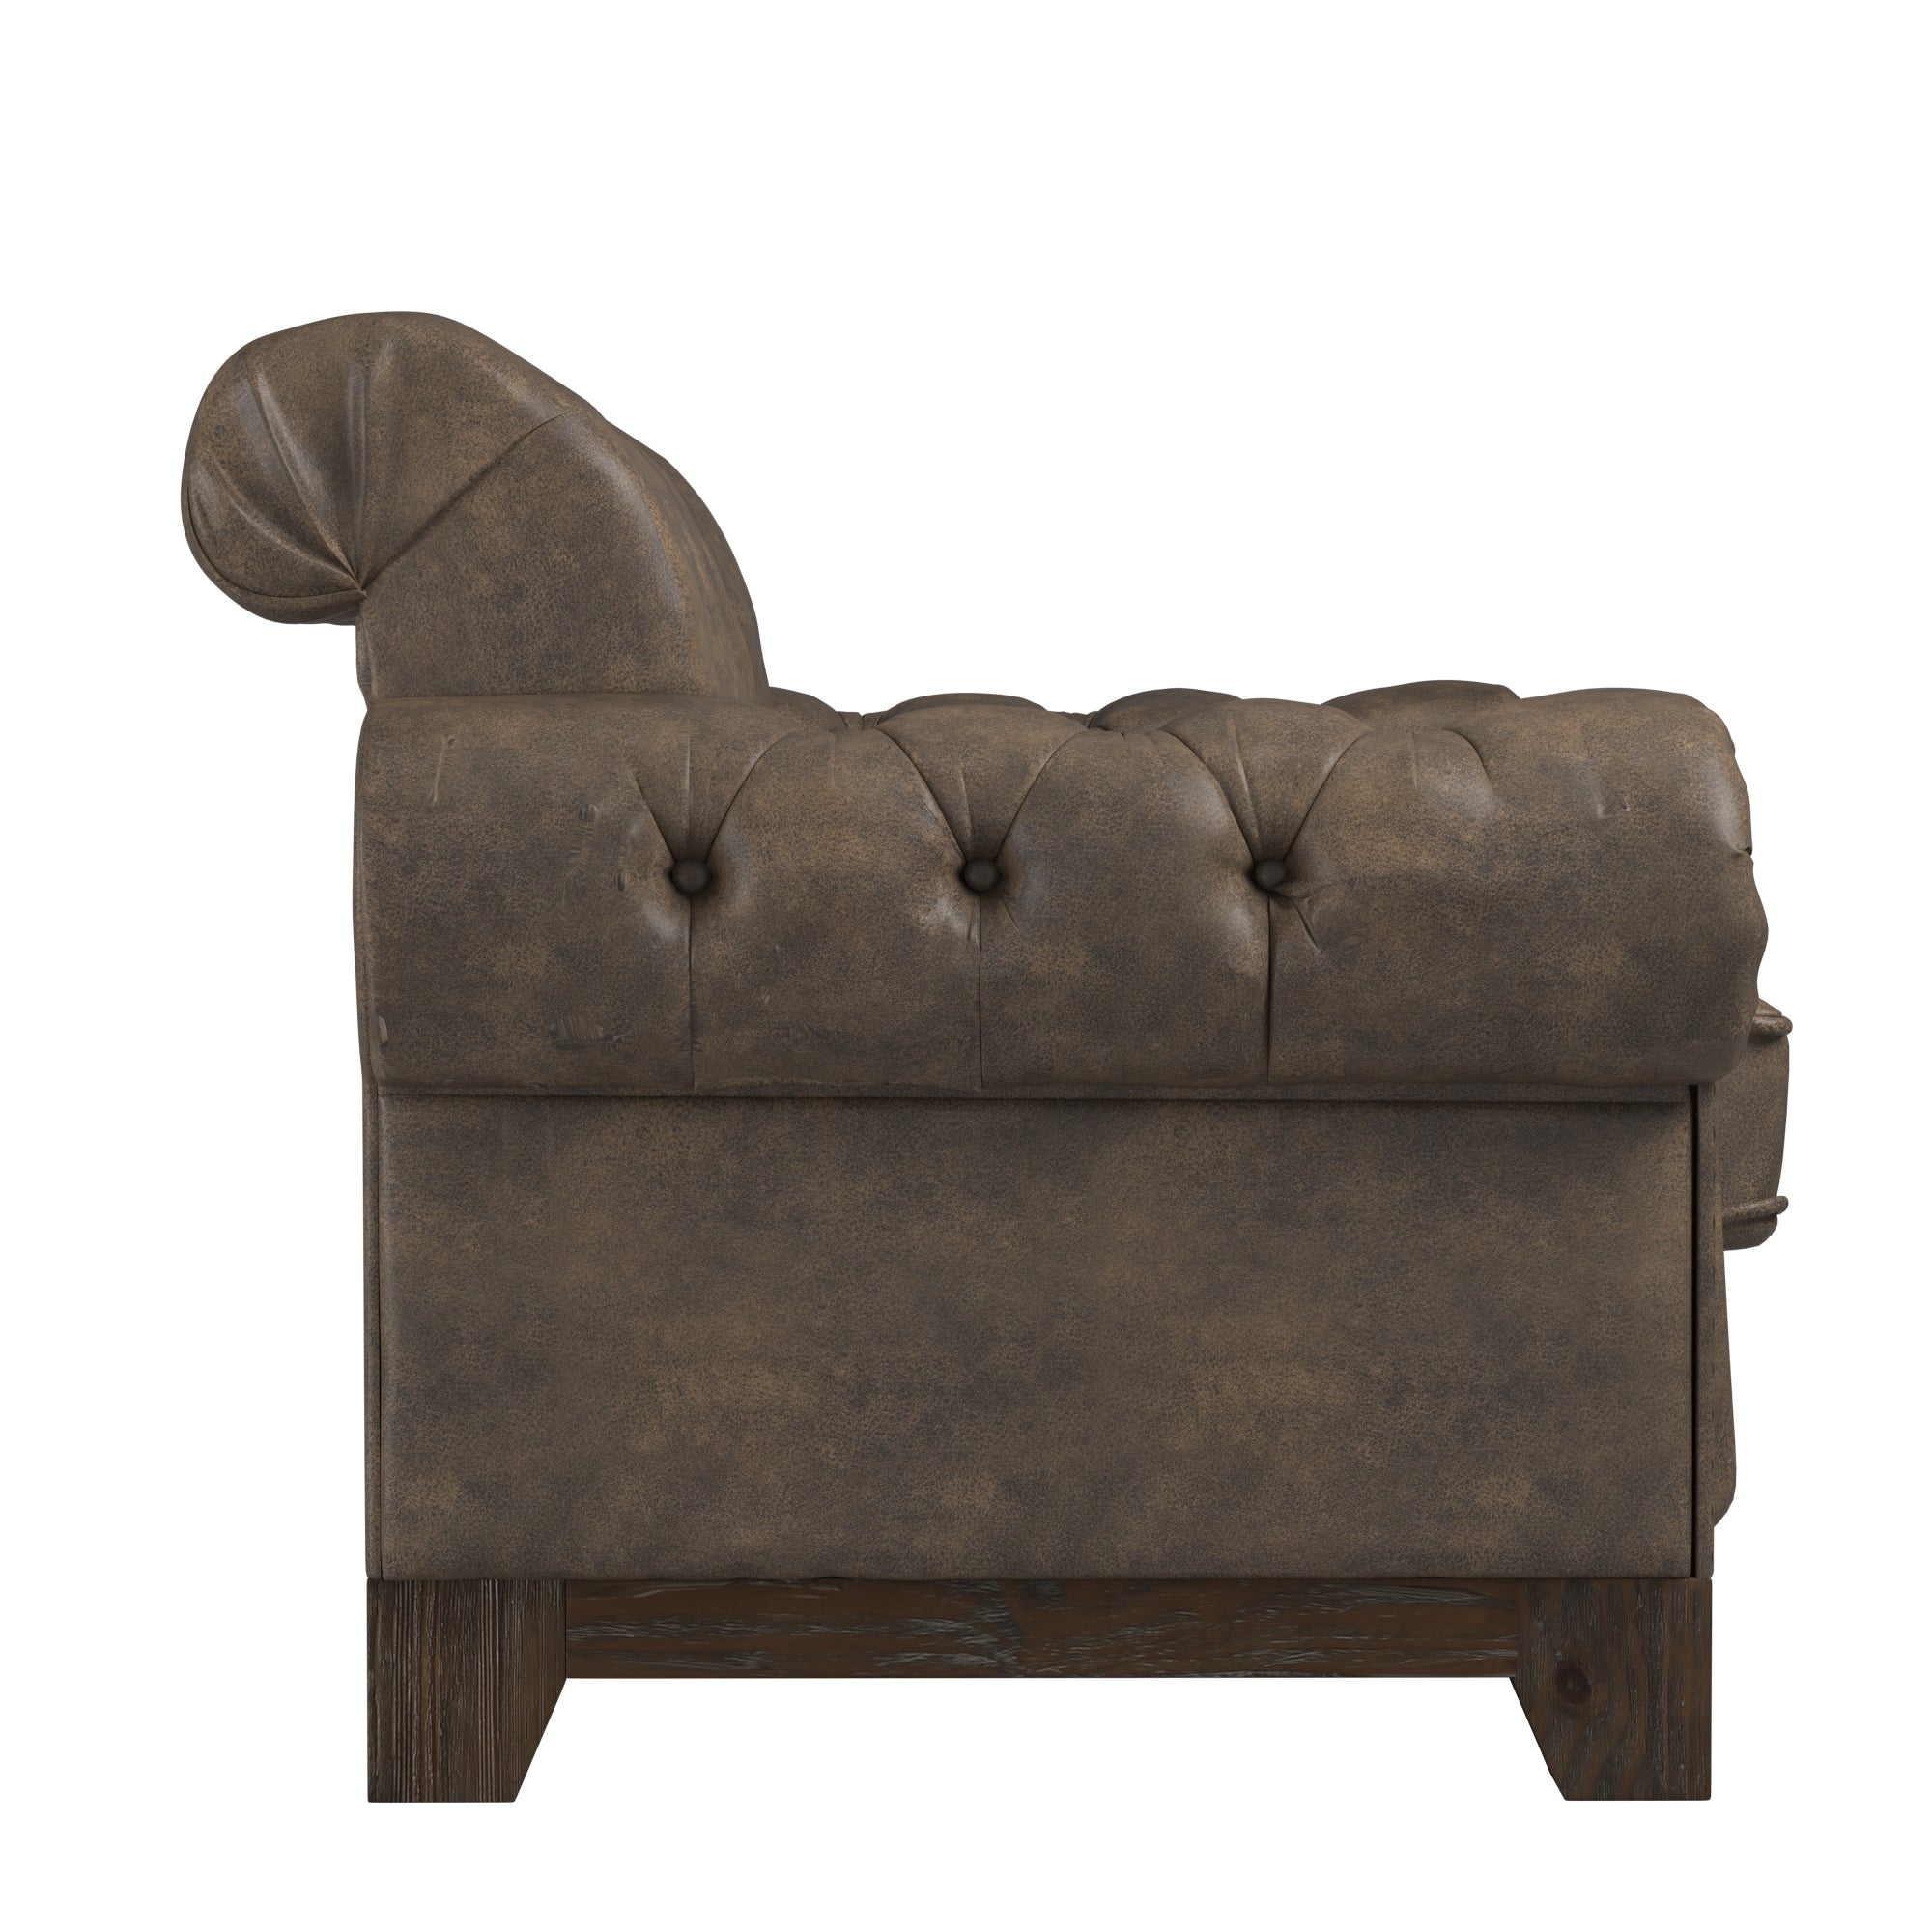 Tufted Rolled Arm Chesterfield Loveseat - Brown Polished Microfiber